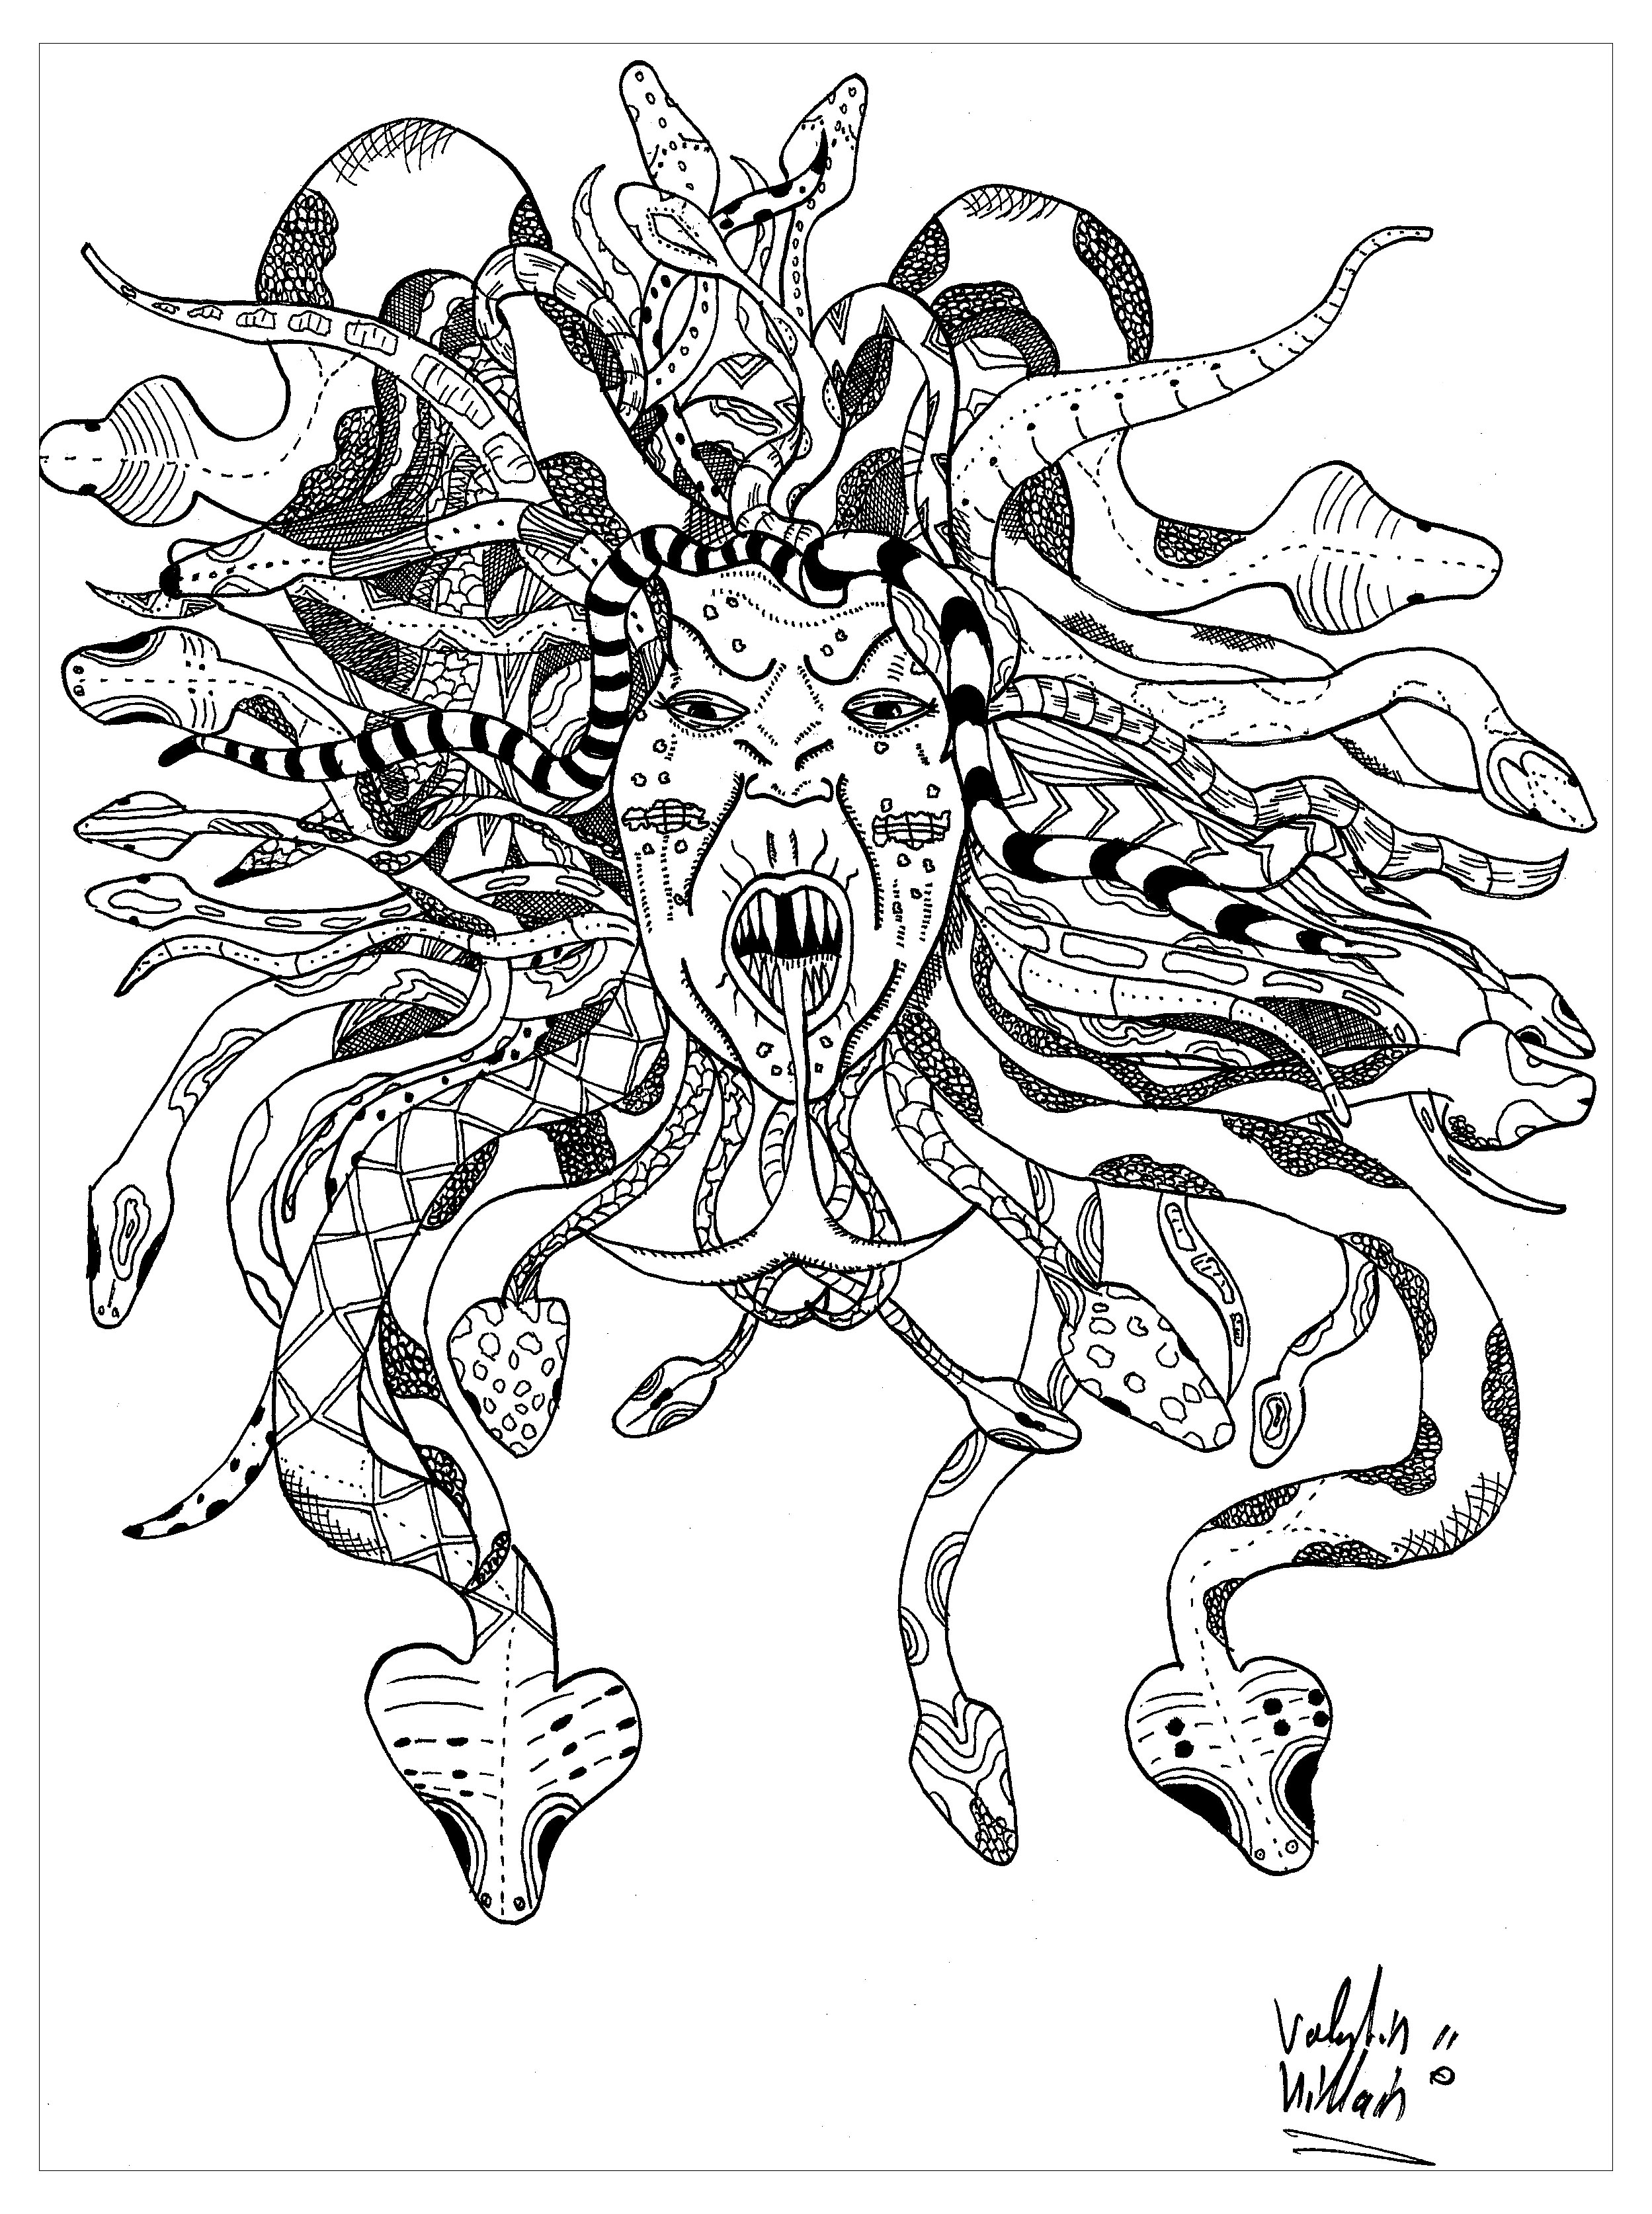 Dark Fantasy Fantasy Coloring Pages For Adults - Select from 35653